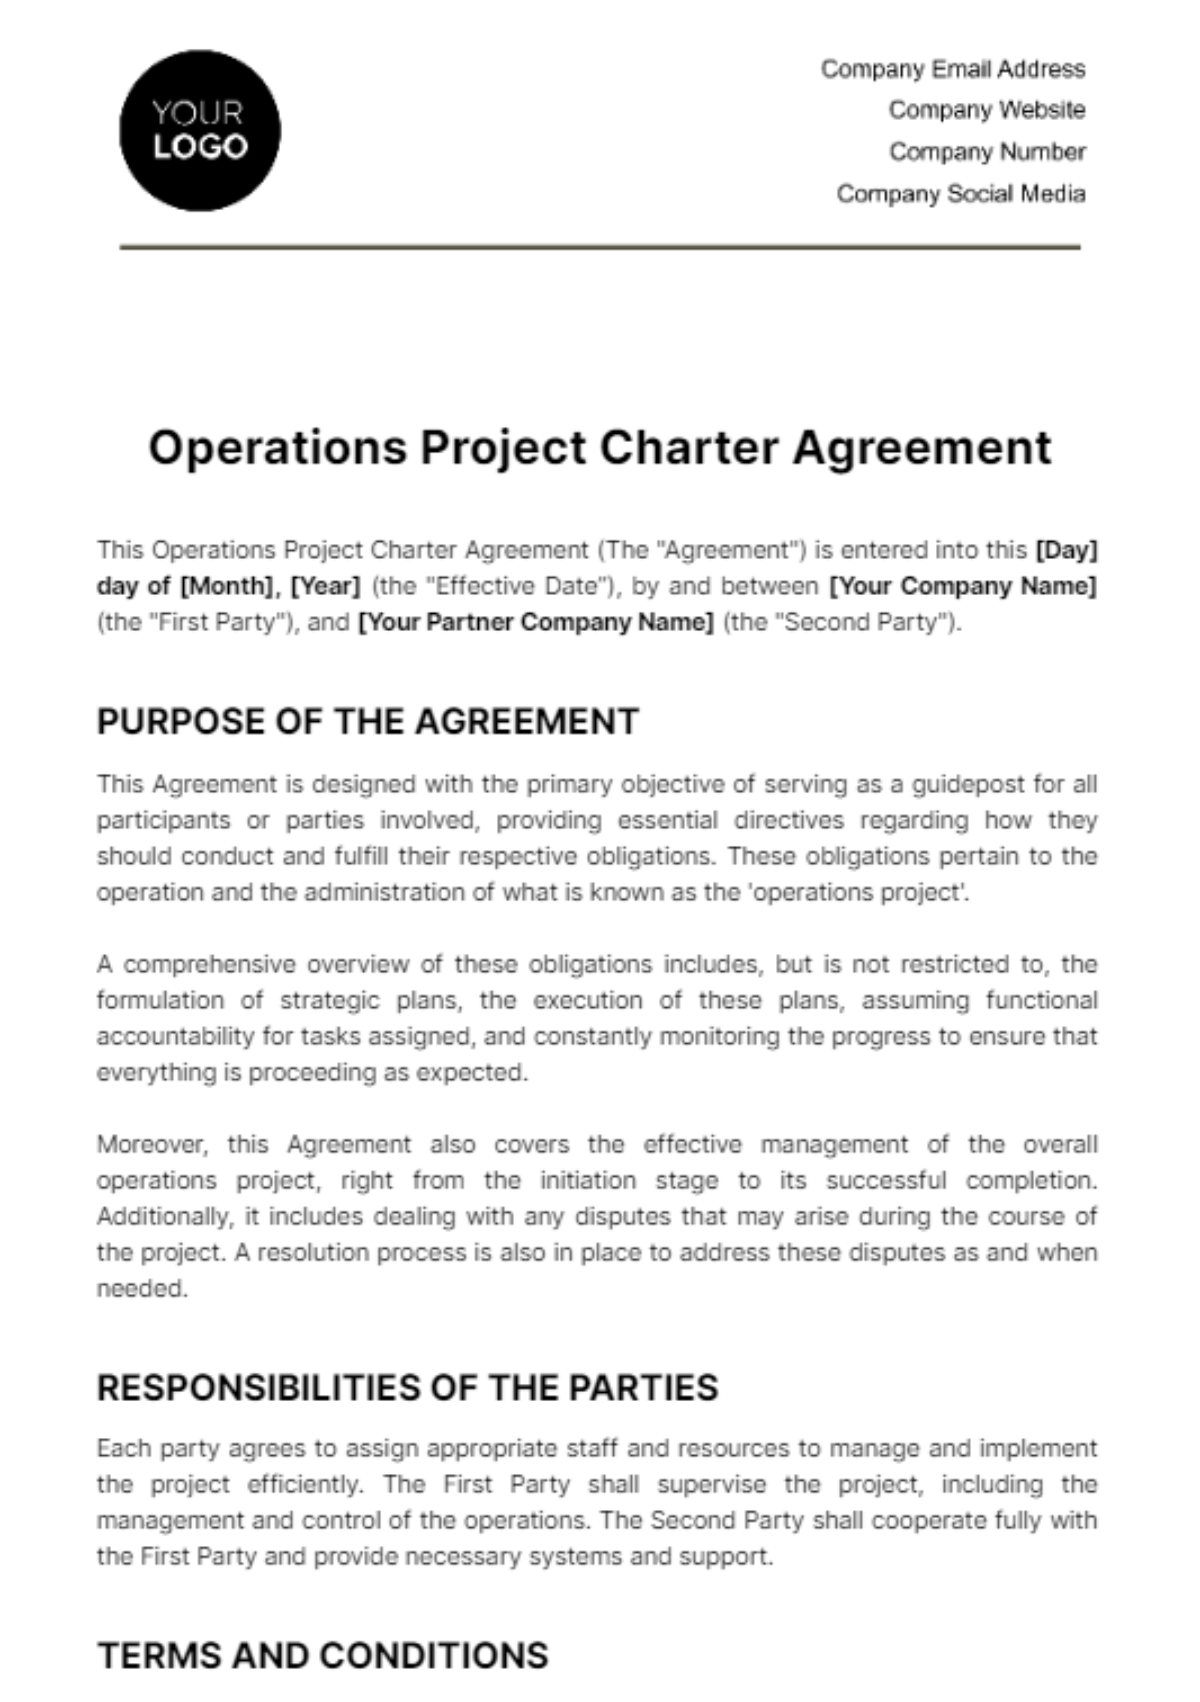 Operations Project Charter Agreement Template